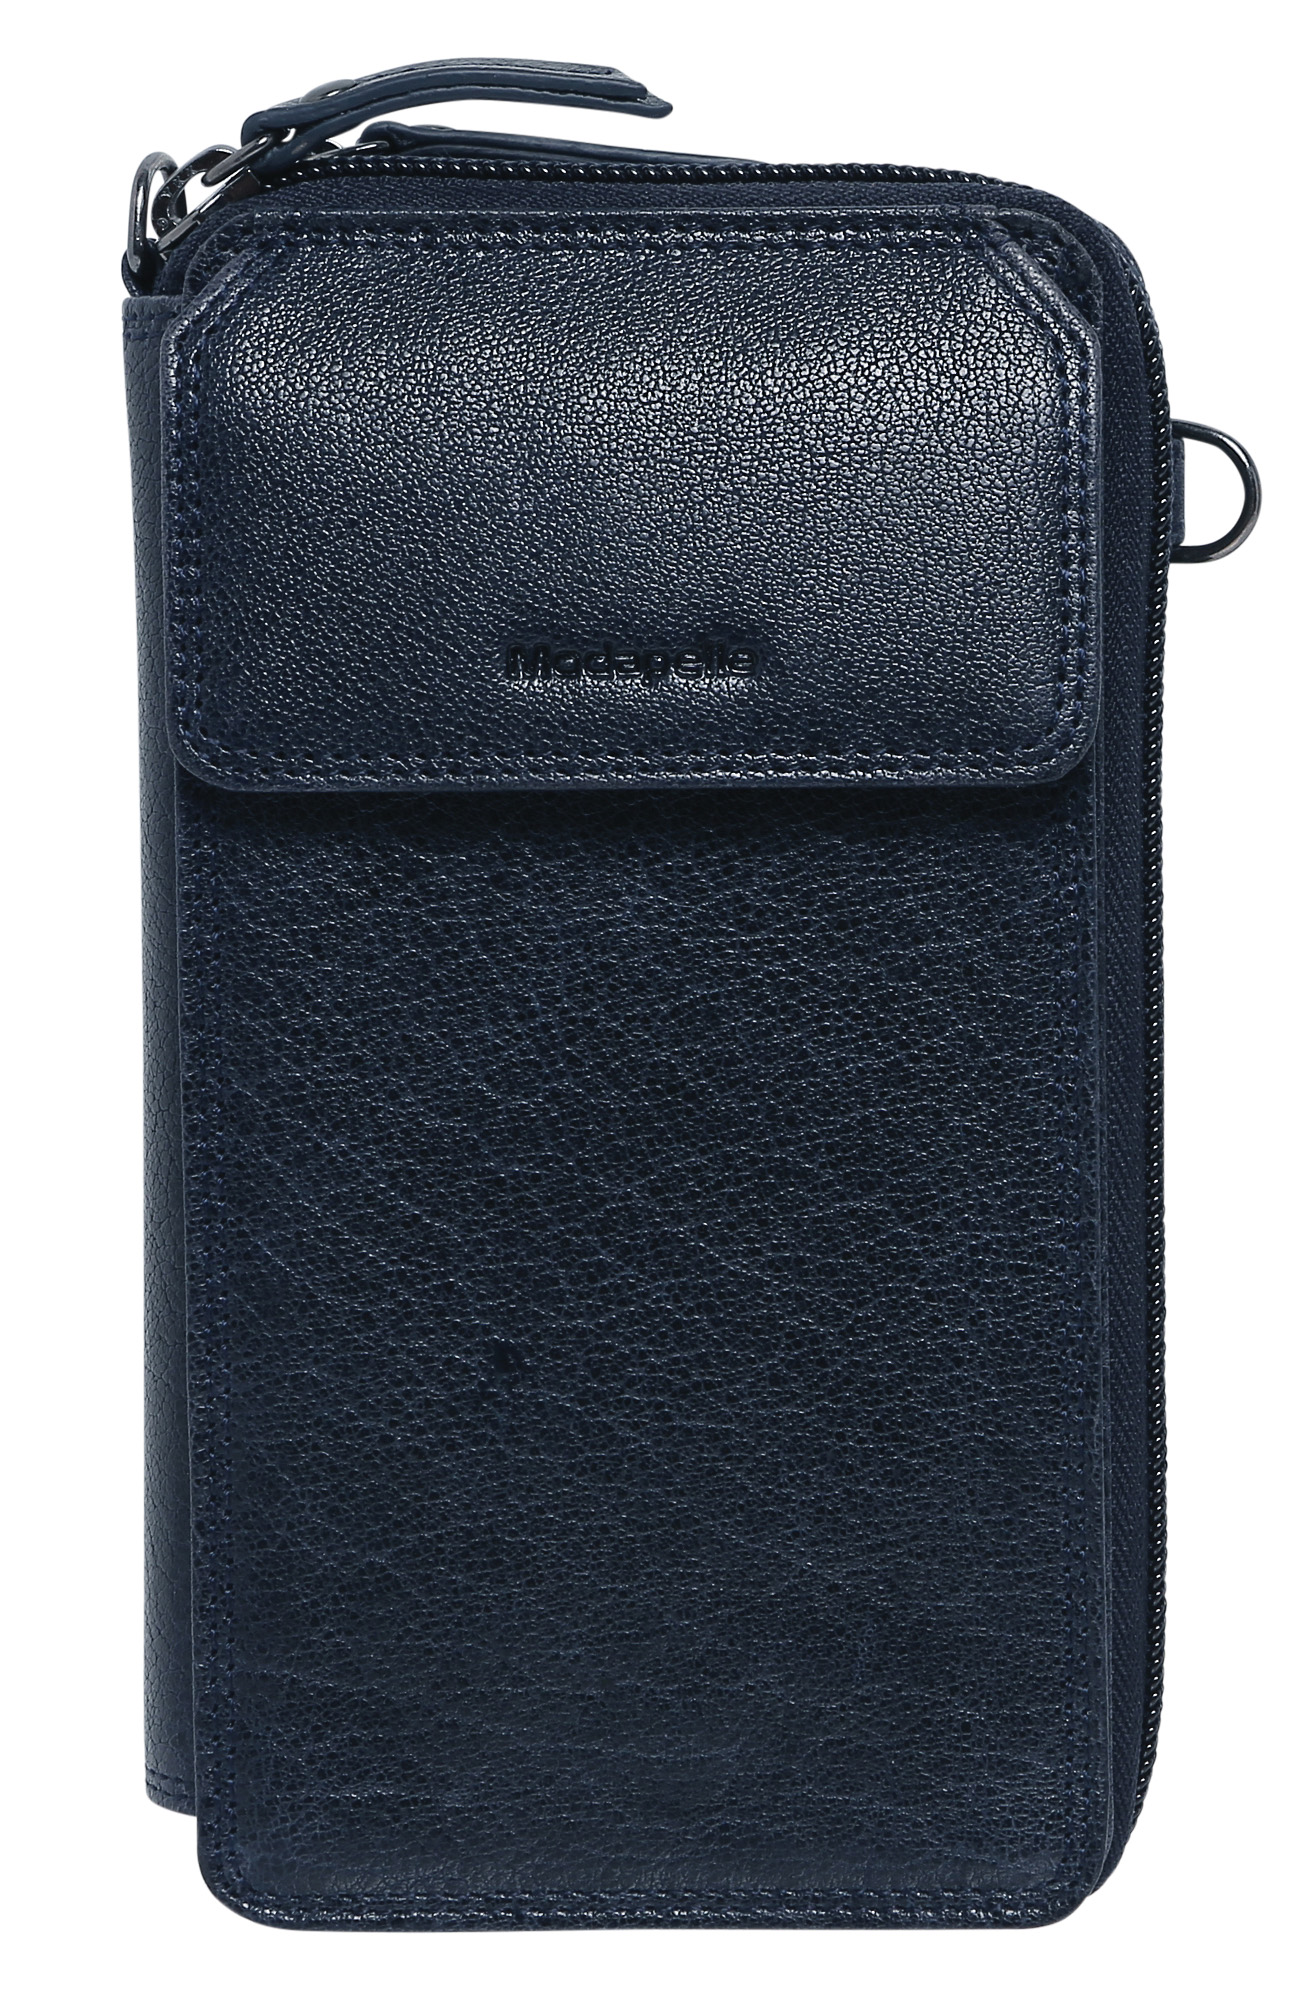 Leather Wallet 7330 Navy - Modapelle Direct